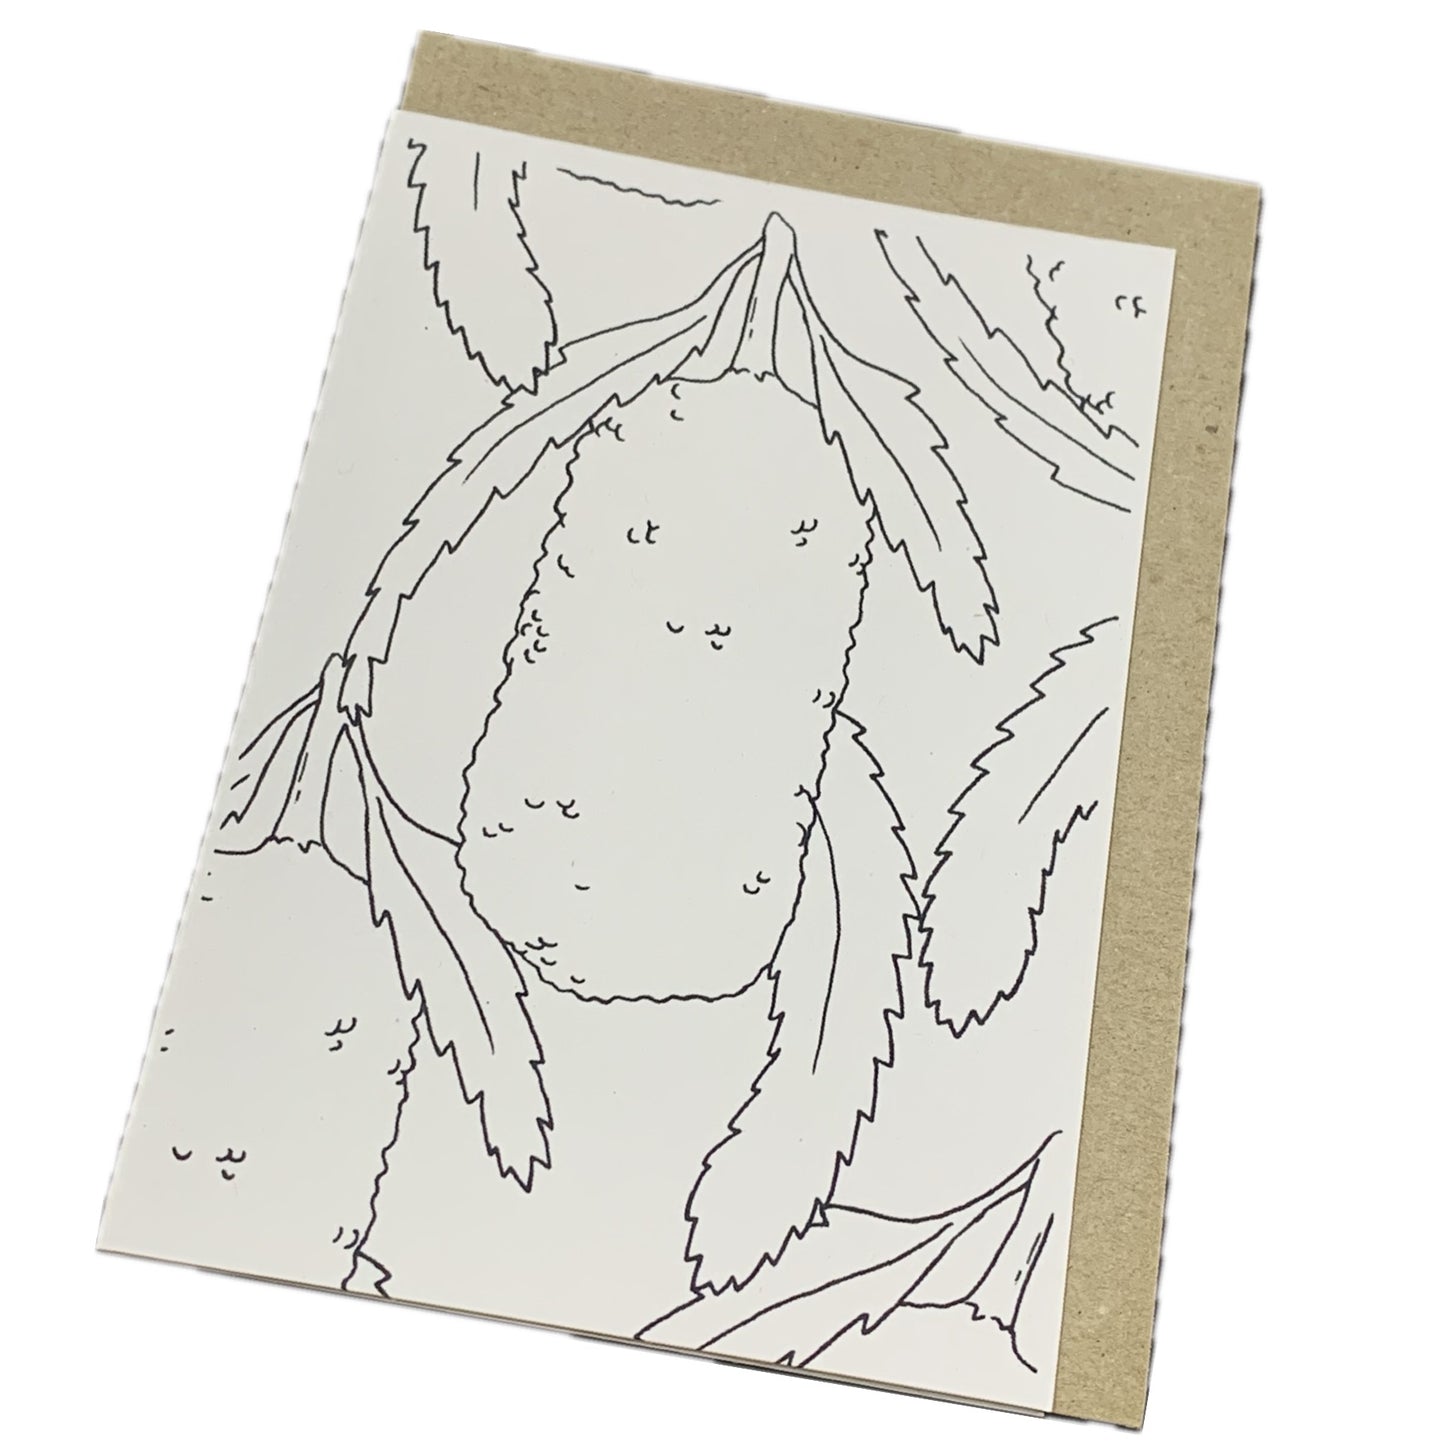 Shanna Trees Creations- "Colour Your Own" Greeting Cards- Set of 5